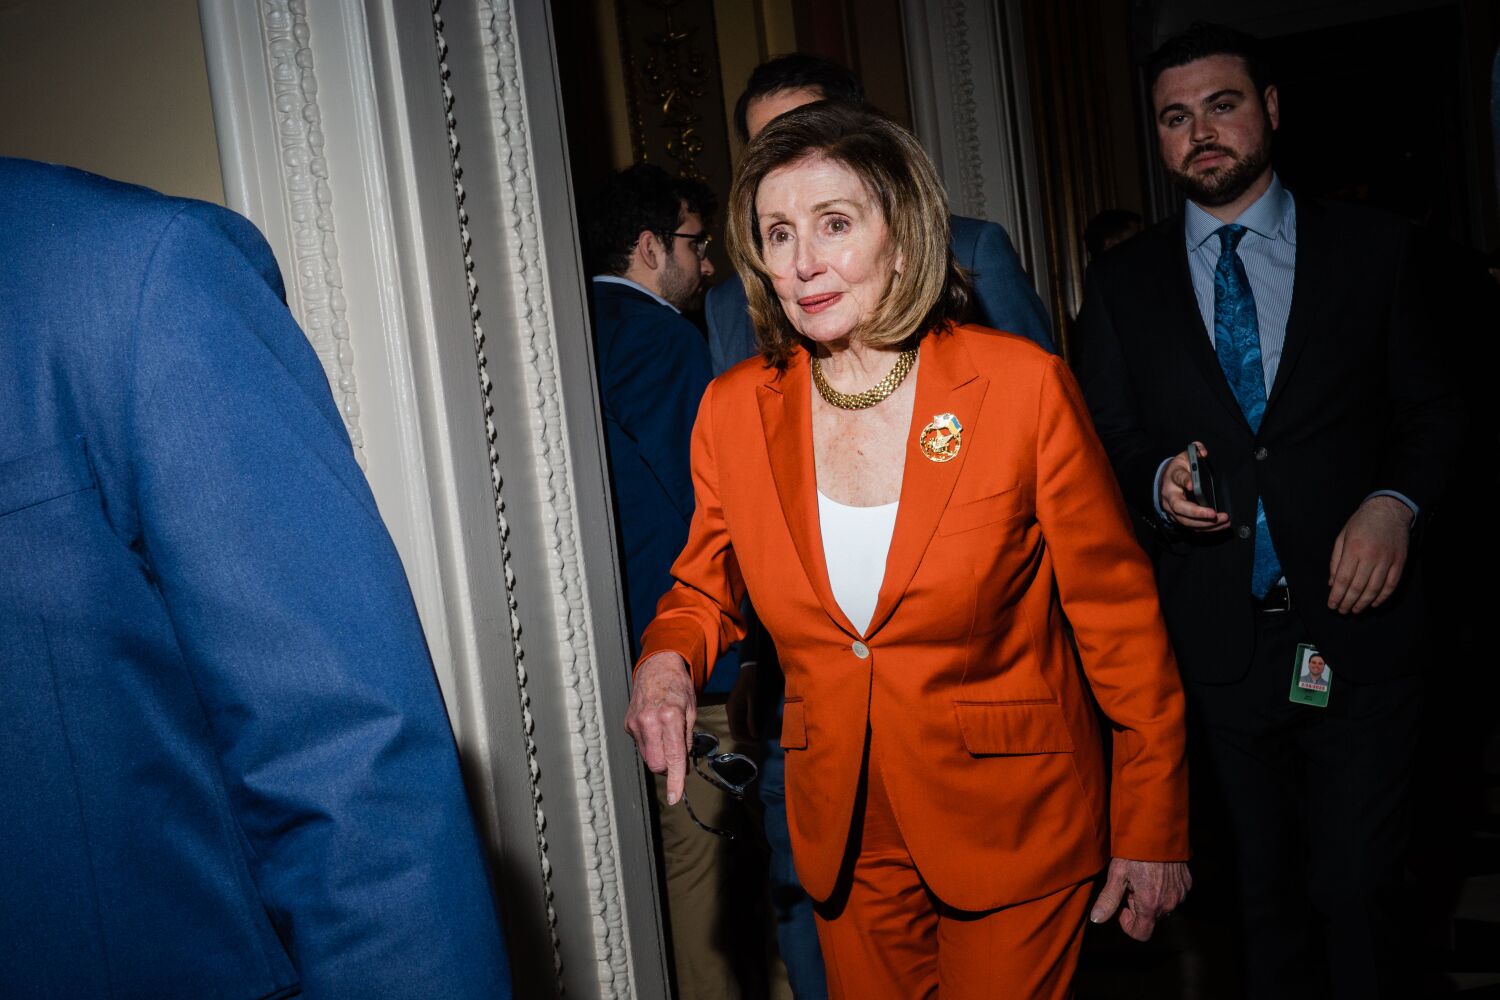 Nancy Pelosi had her ups and downs with California Democrats. Now it's a love fest